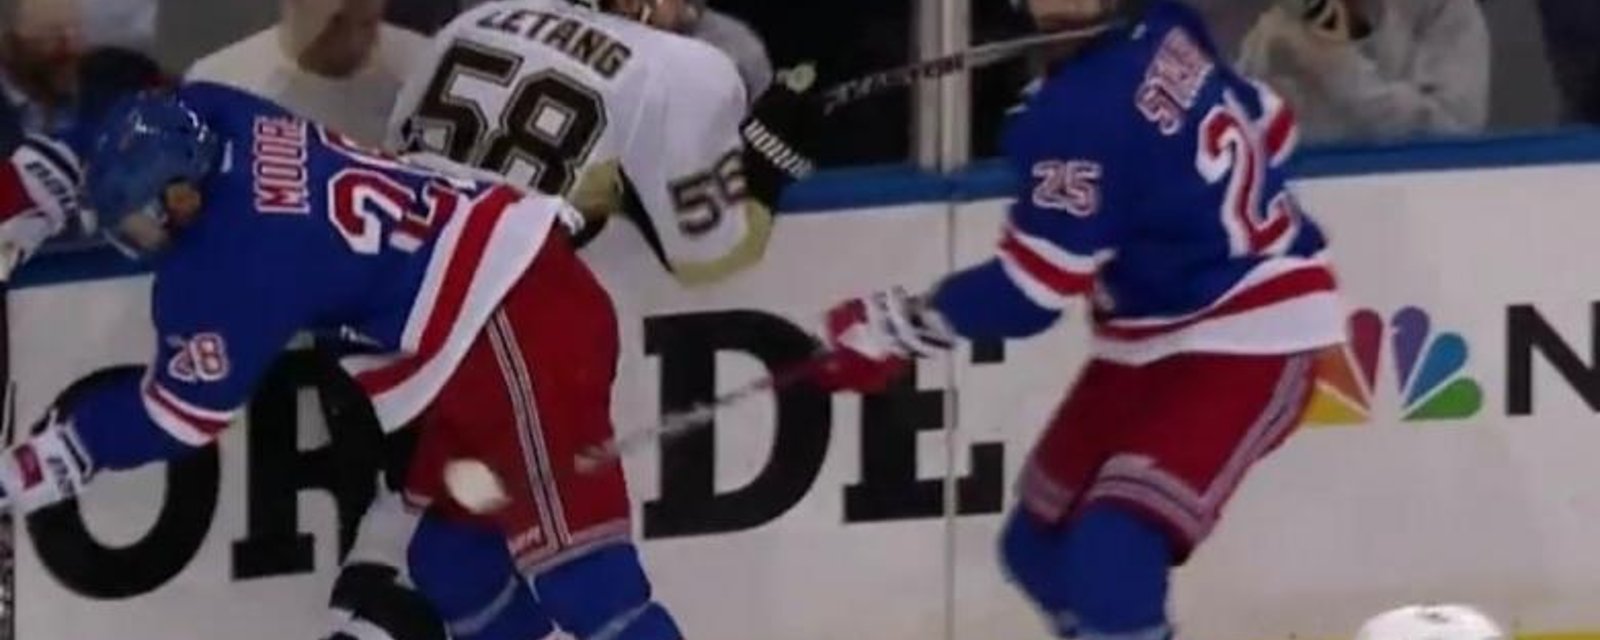 Kris Letang delivers a hard slash to the face of his opponent.